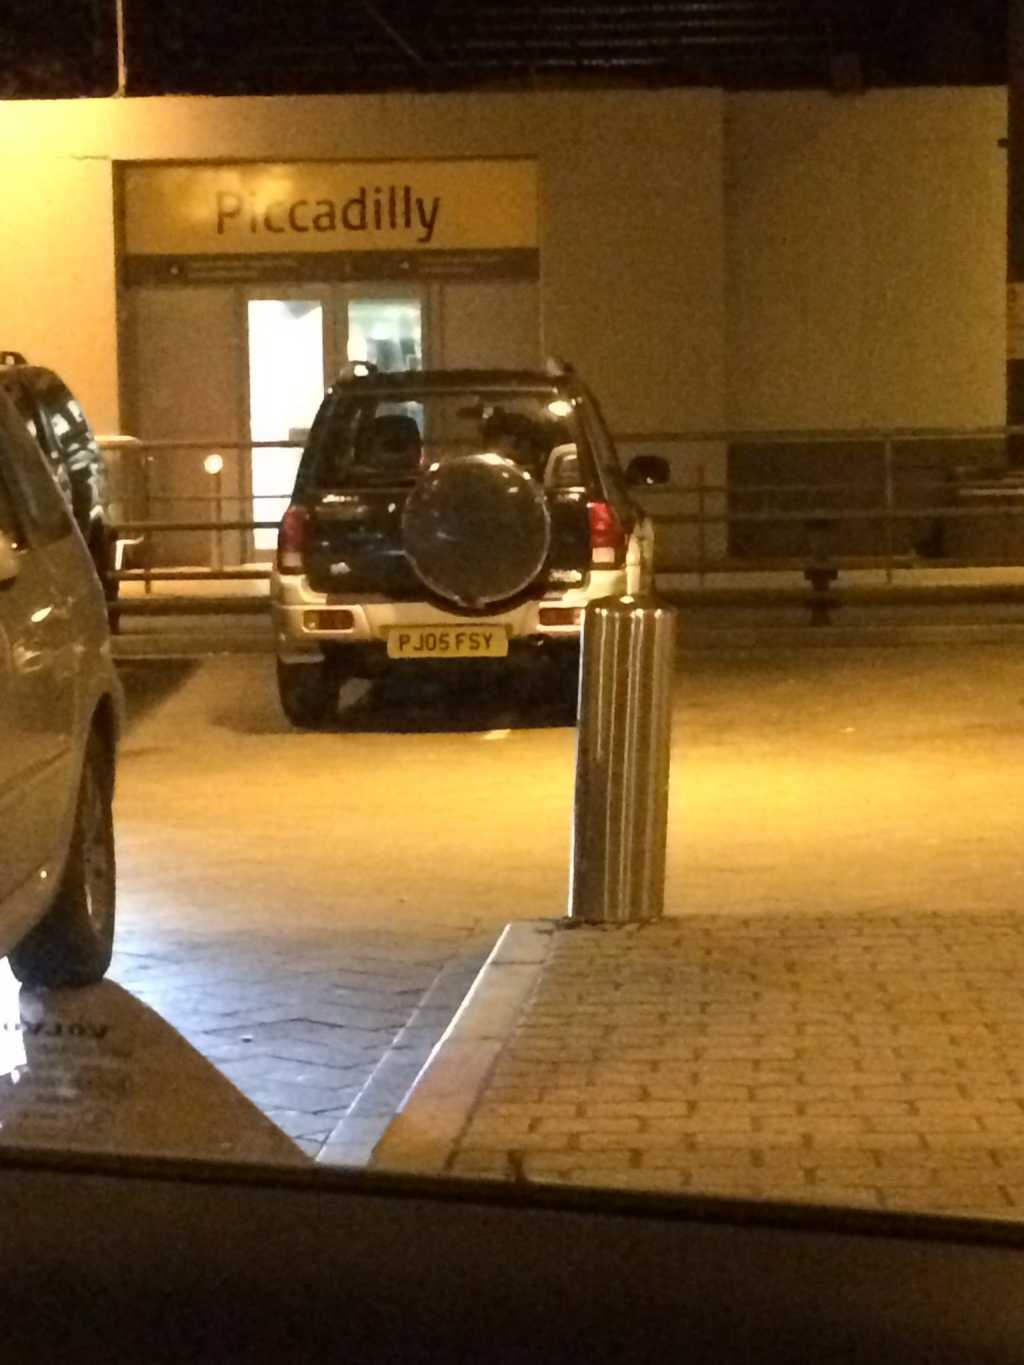 PJ05 FSY is a crap parker